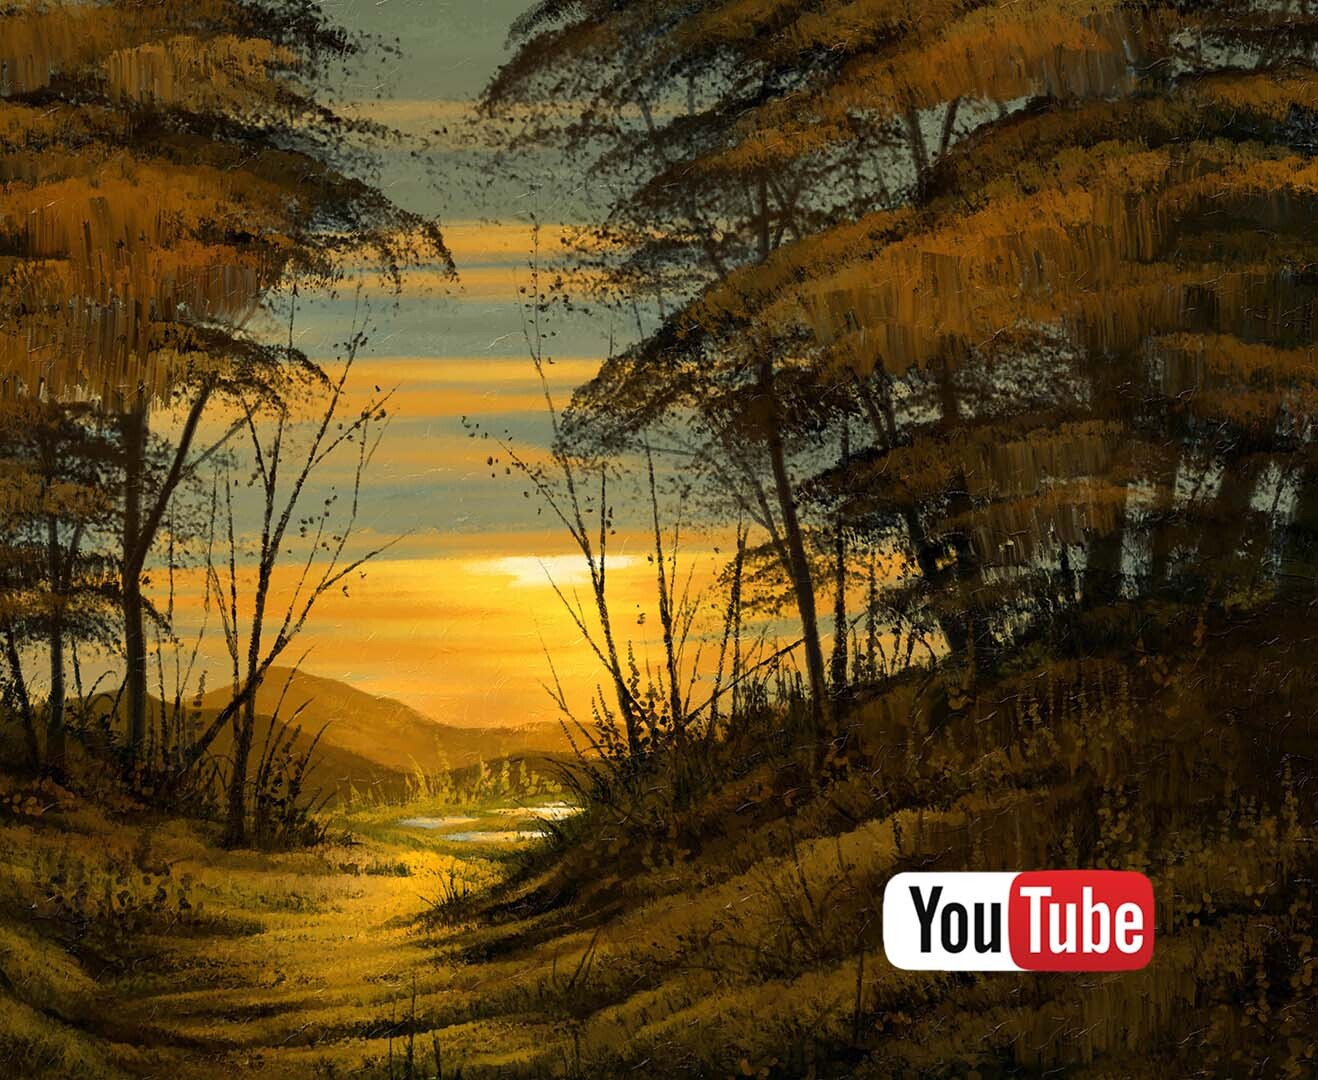 How to Paint digitally a traditional Landscape Painting - FREE! Tutorial (pt 1.)